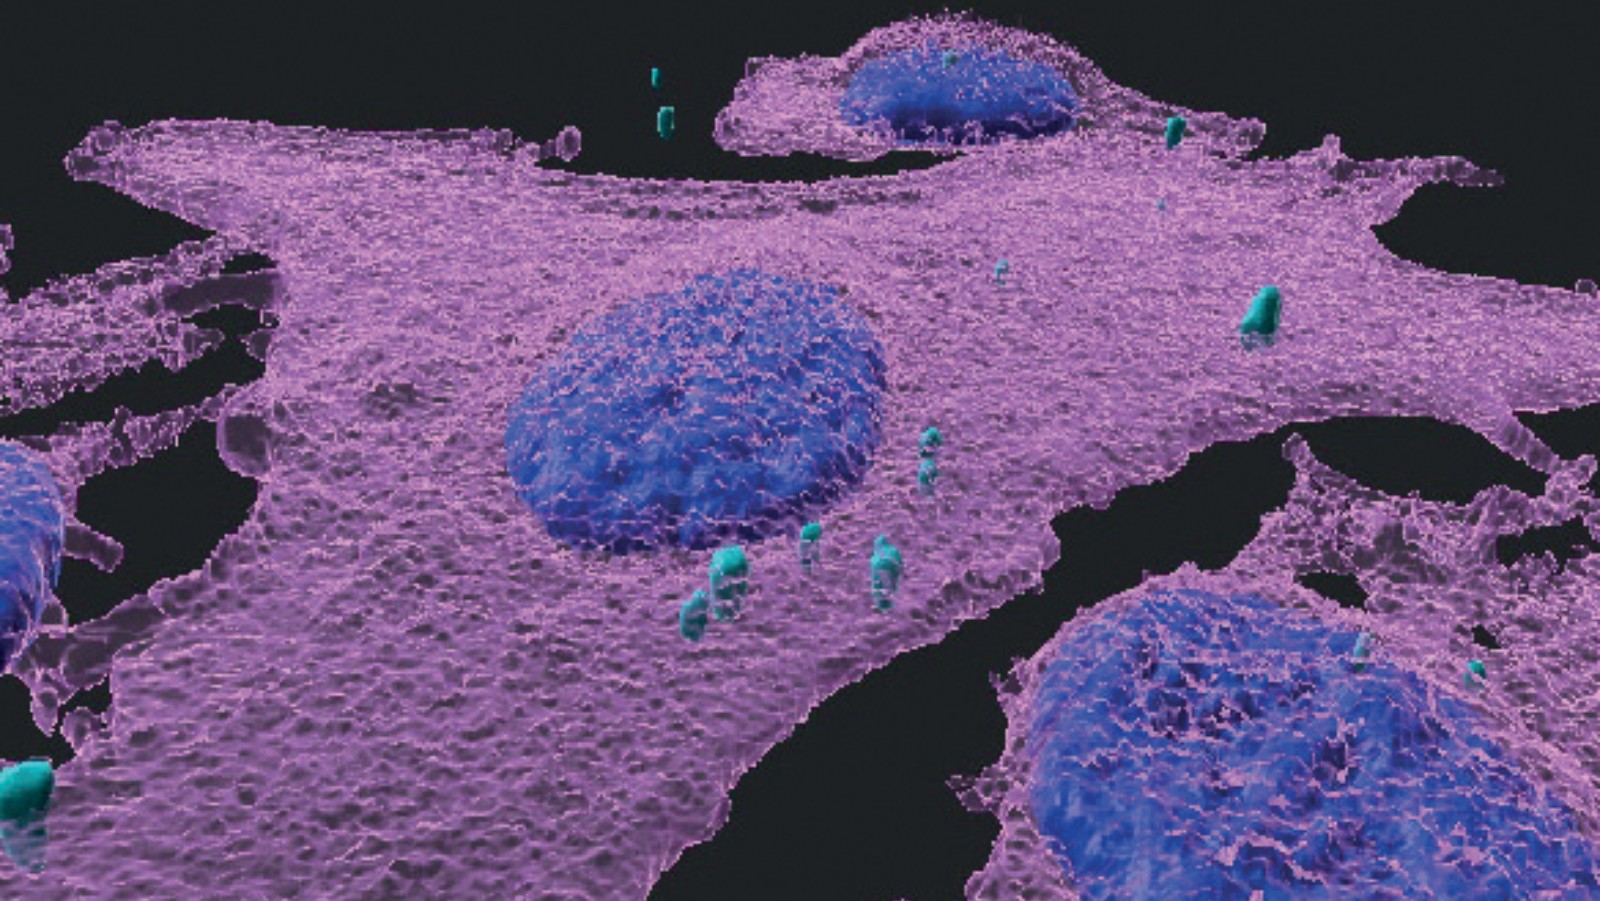 A 3D immunofluorescent image of melanoma cells (magenta) infected with bacteria (turquoise); cell nuclei are blue. Image courtesy of Weizmann Institute of Science